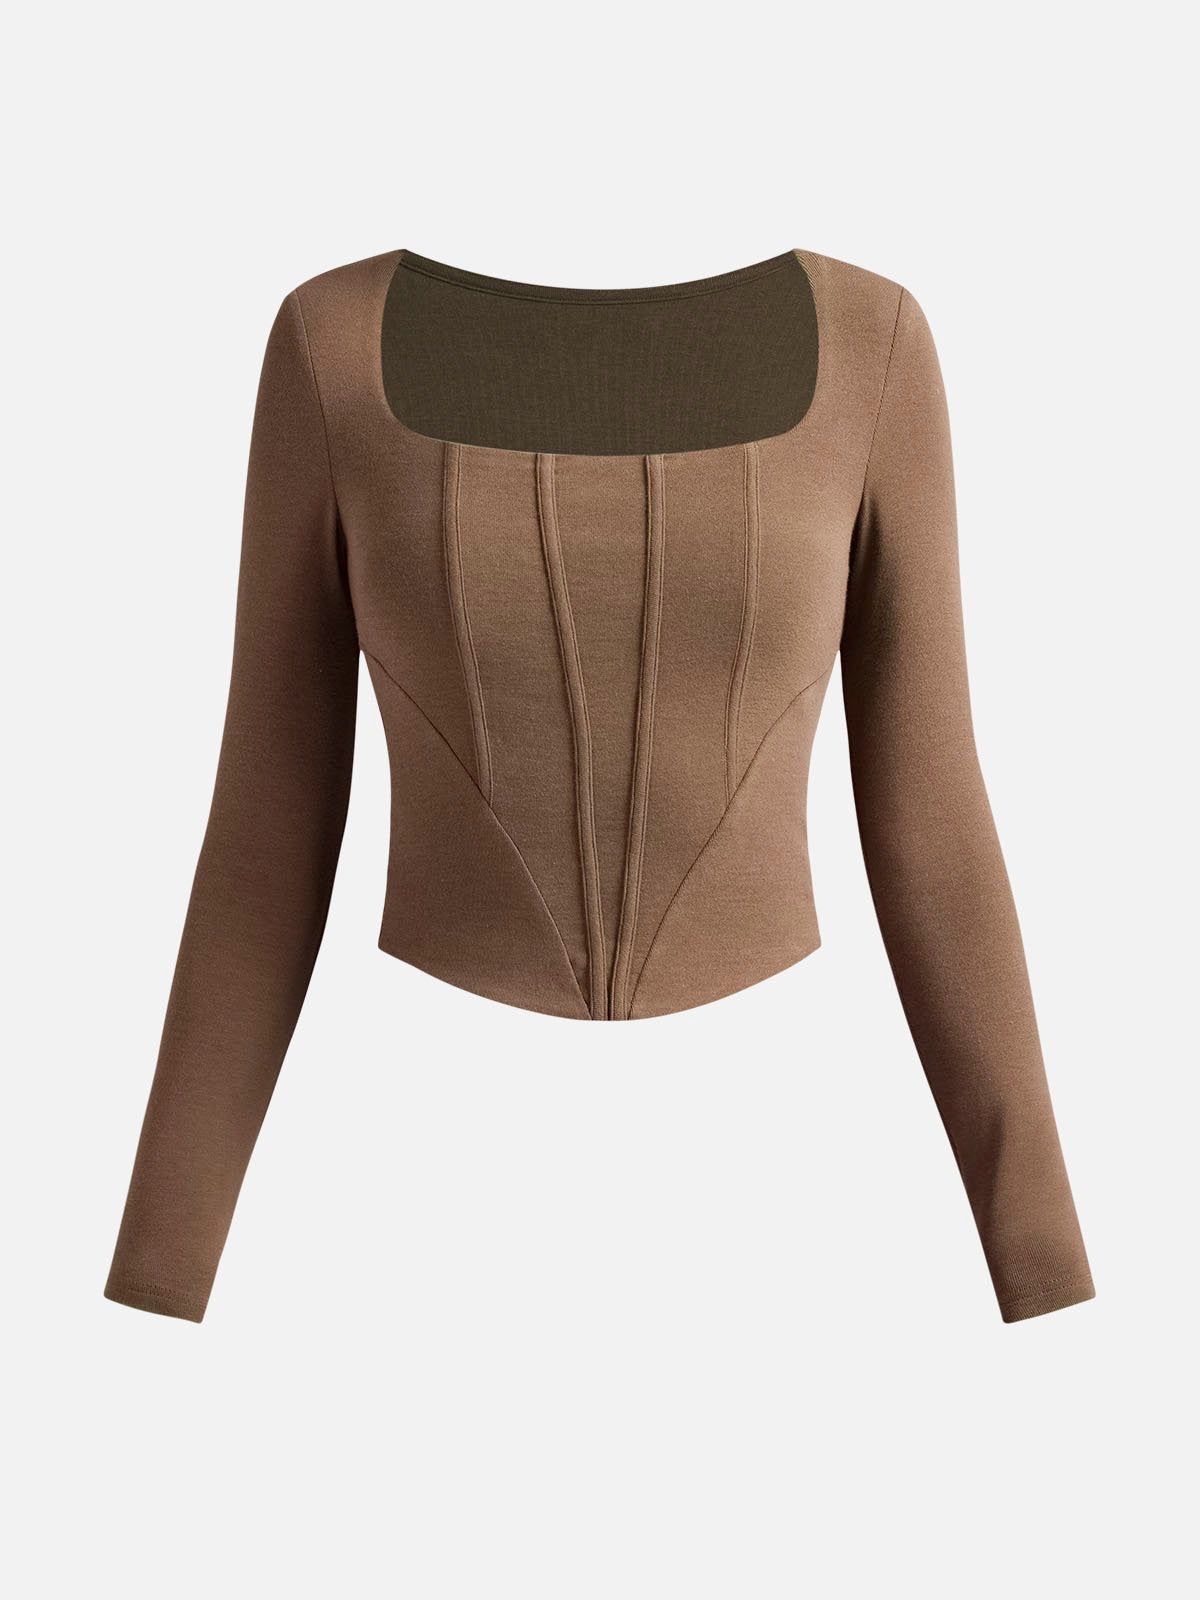 OGLmove Long Sleeve Square Neck Corset Top for Women